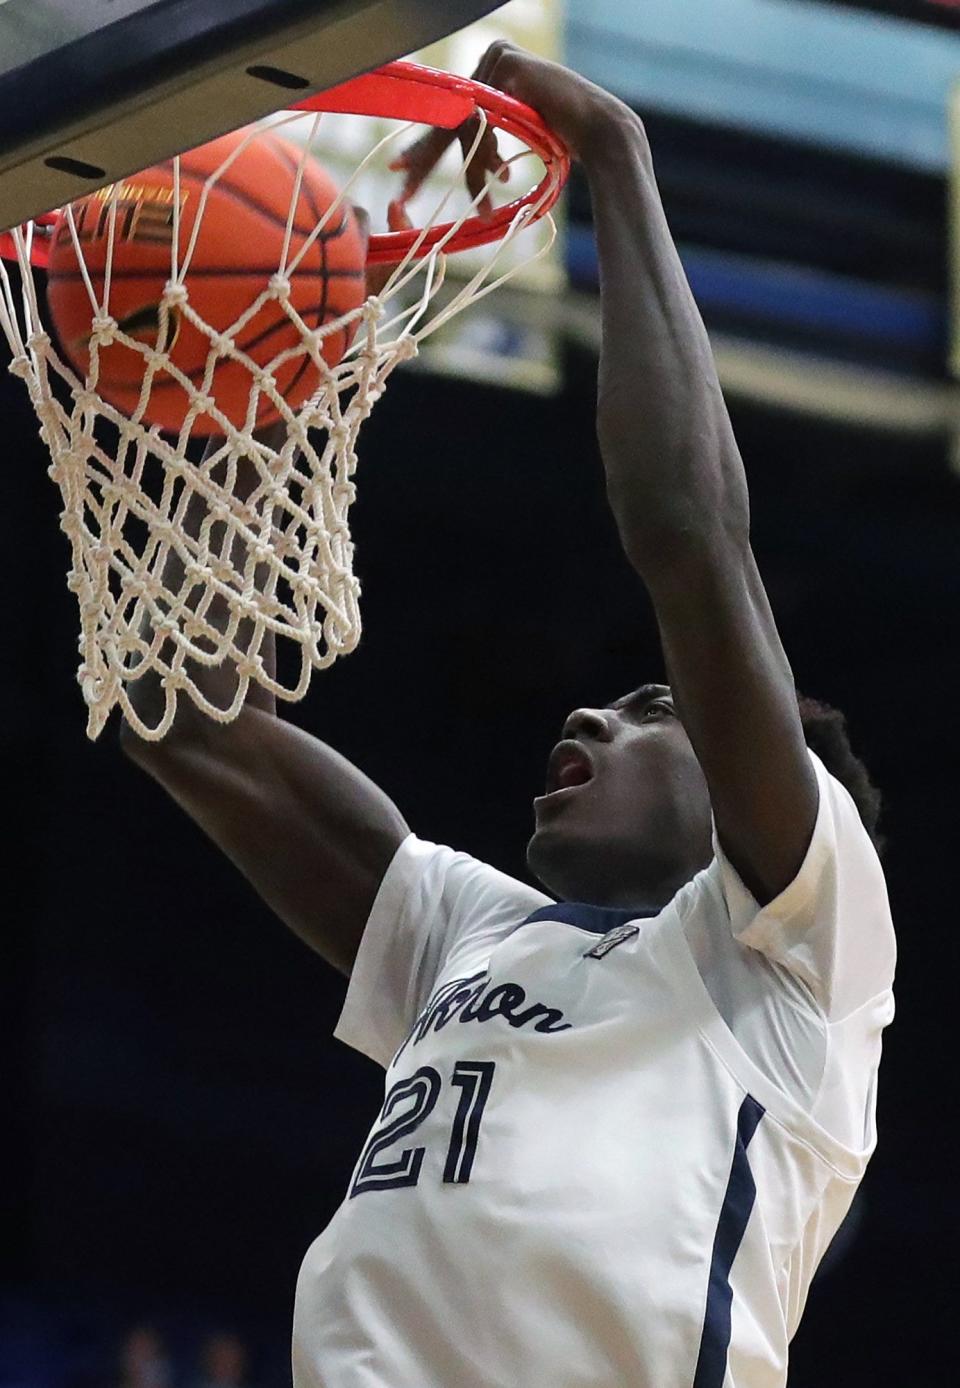 University of Akron center Aziz Bandaogo (21) dunks the ball during the first half of a 66-55 win over Miami University on Friday night at Rhodes Arena. [Jeff Lange/Beacon Journal]